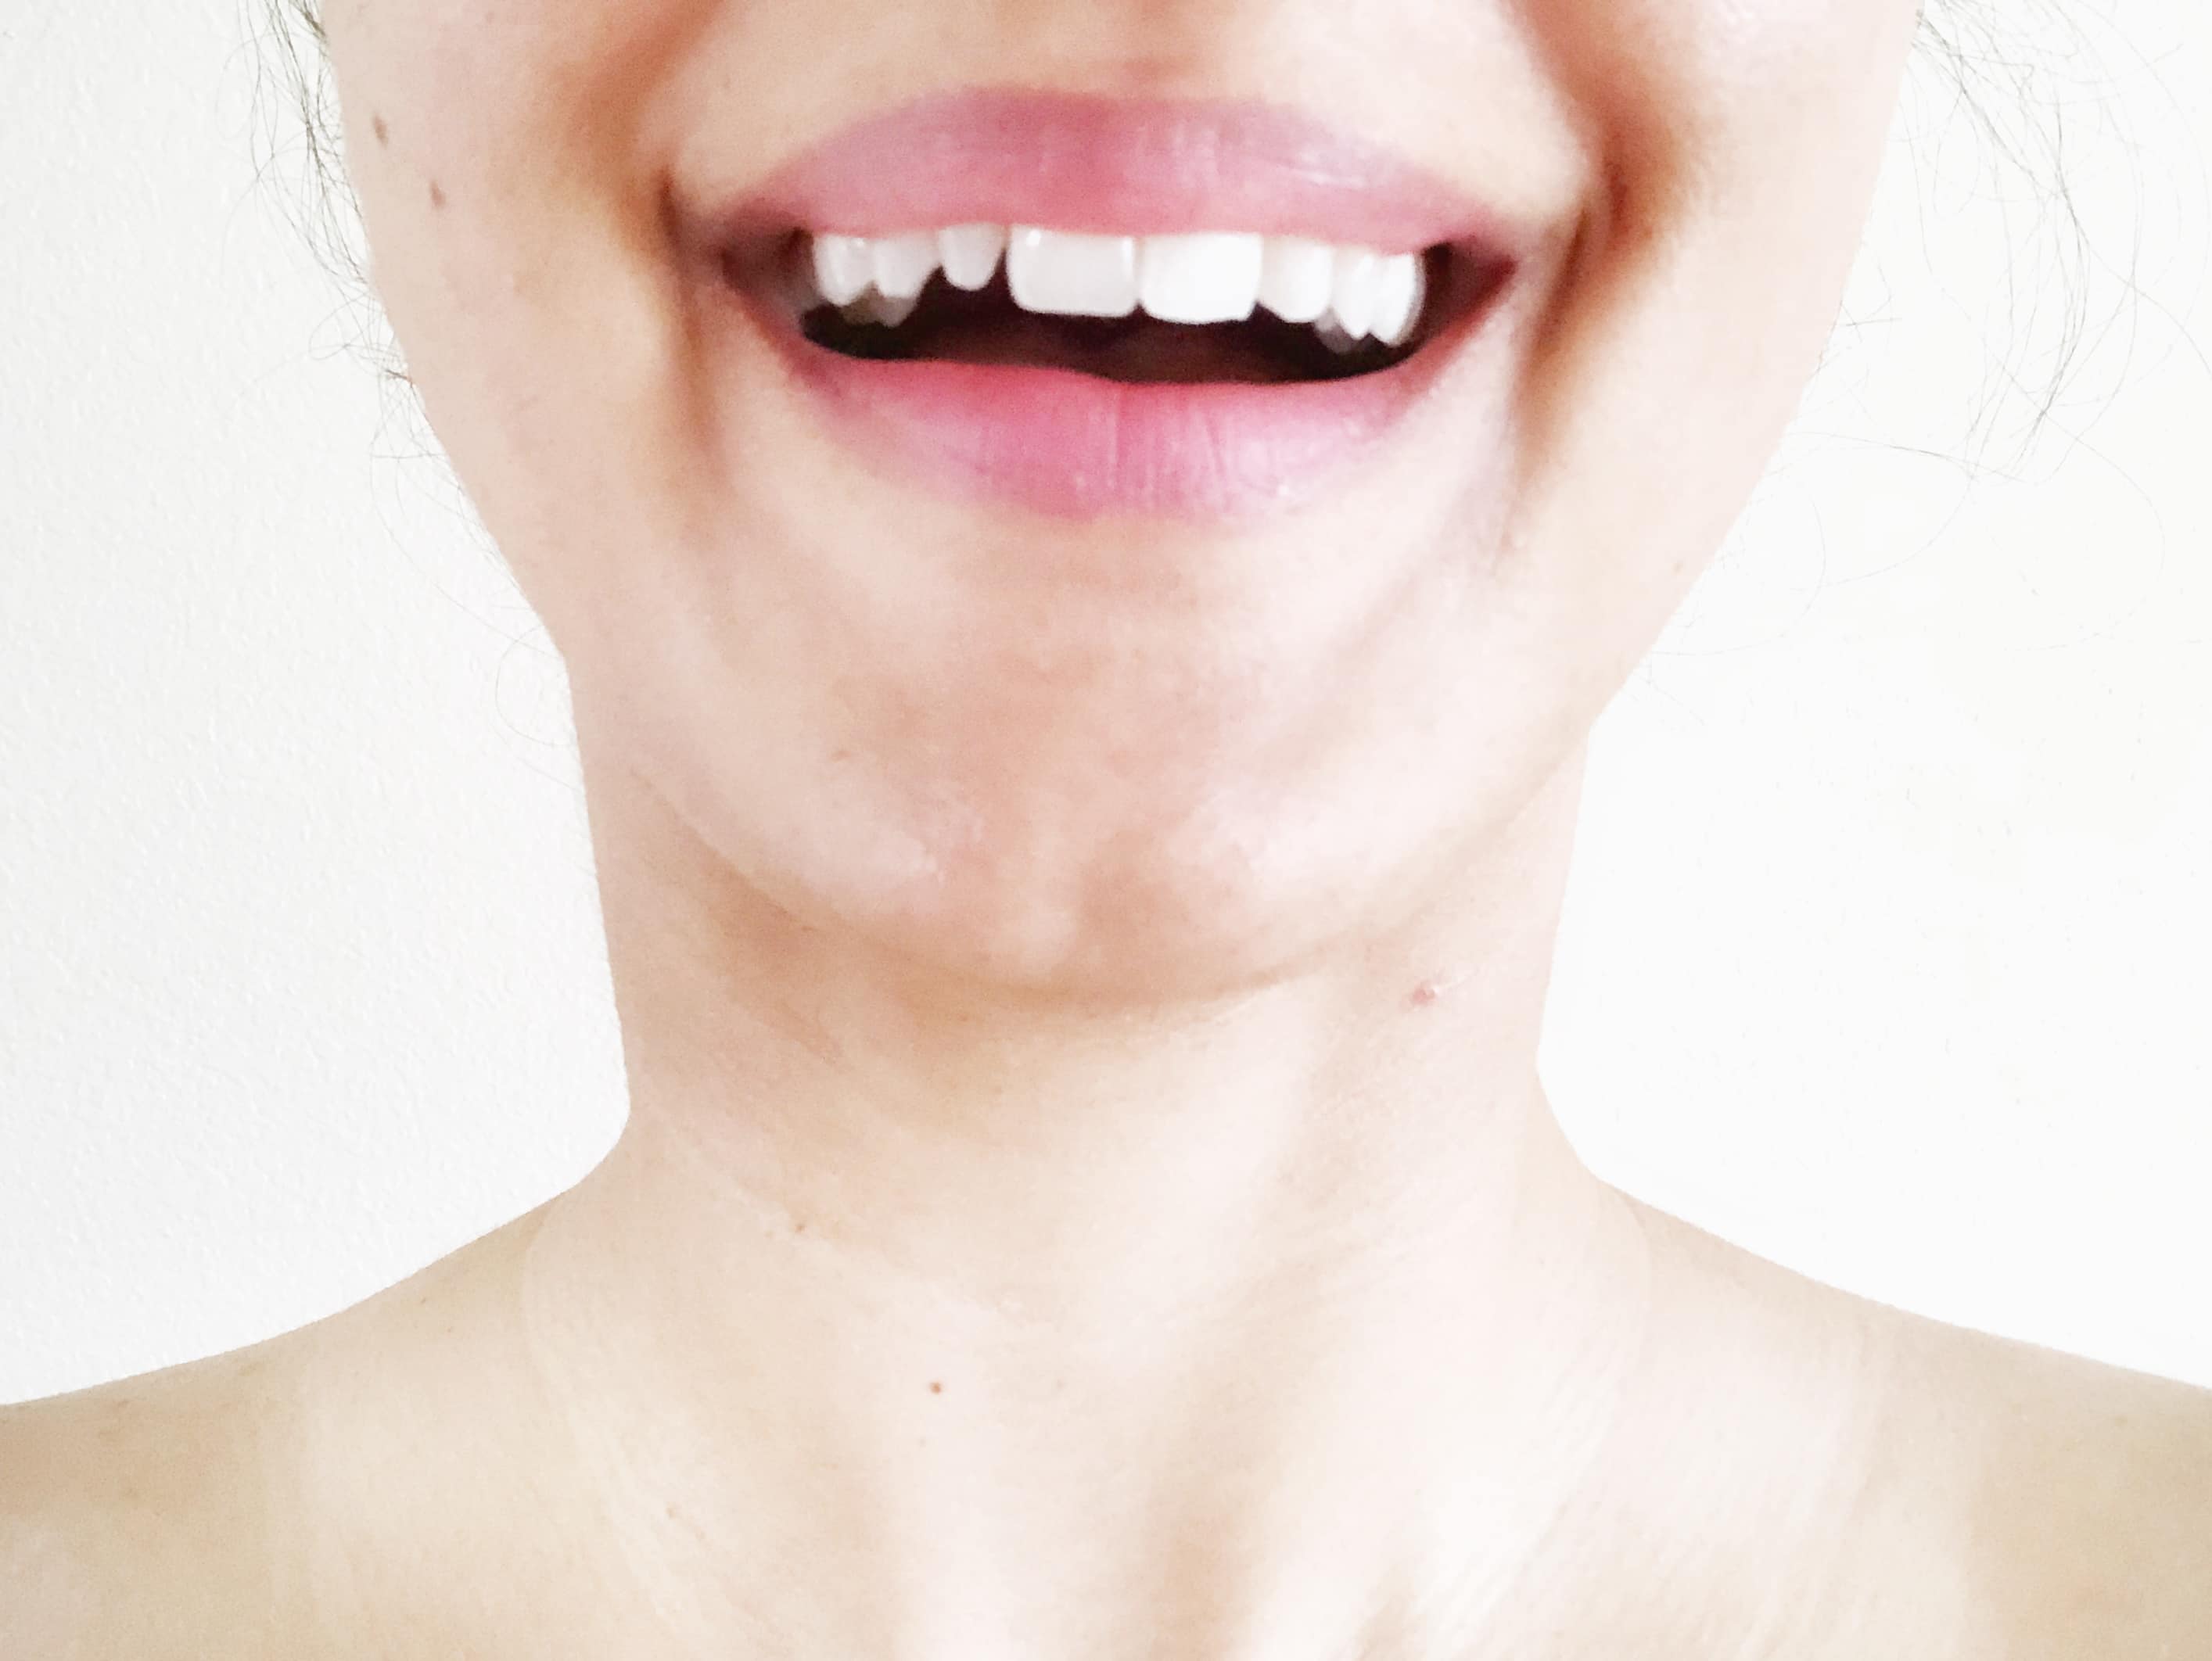 Best At-Home Teeth Whitening Kit - Pros, Cons, & How to Use